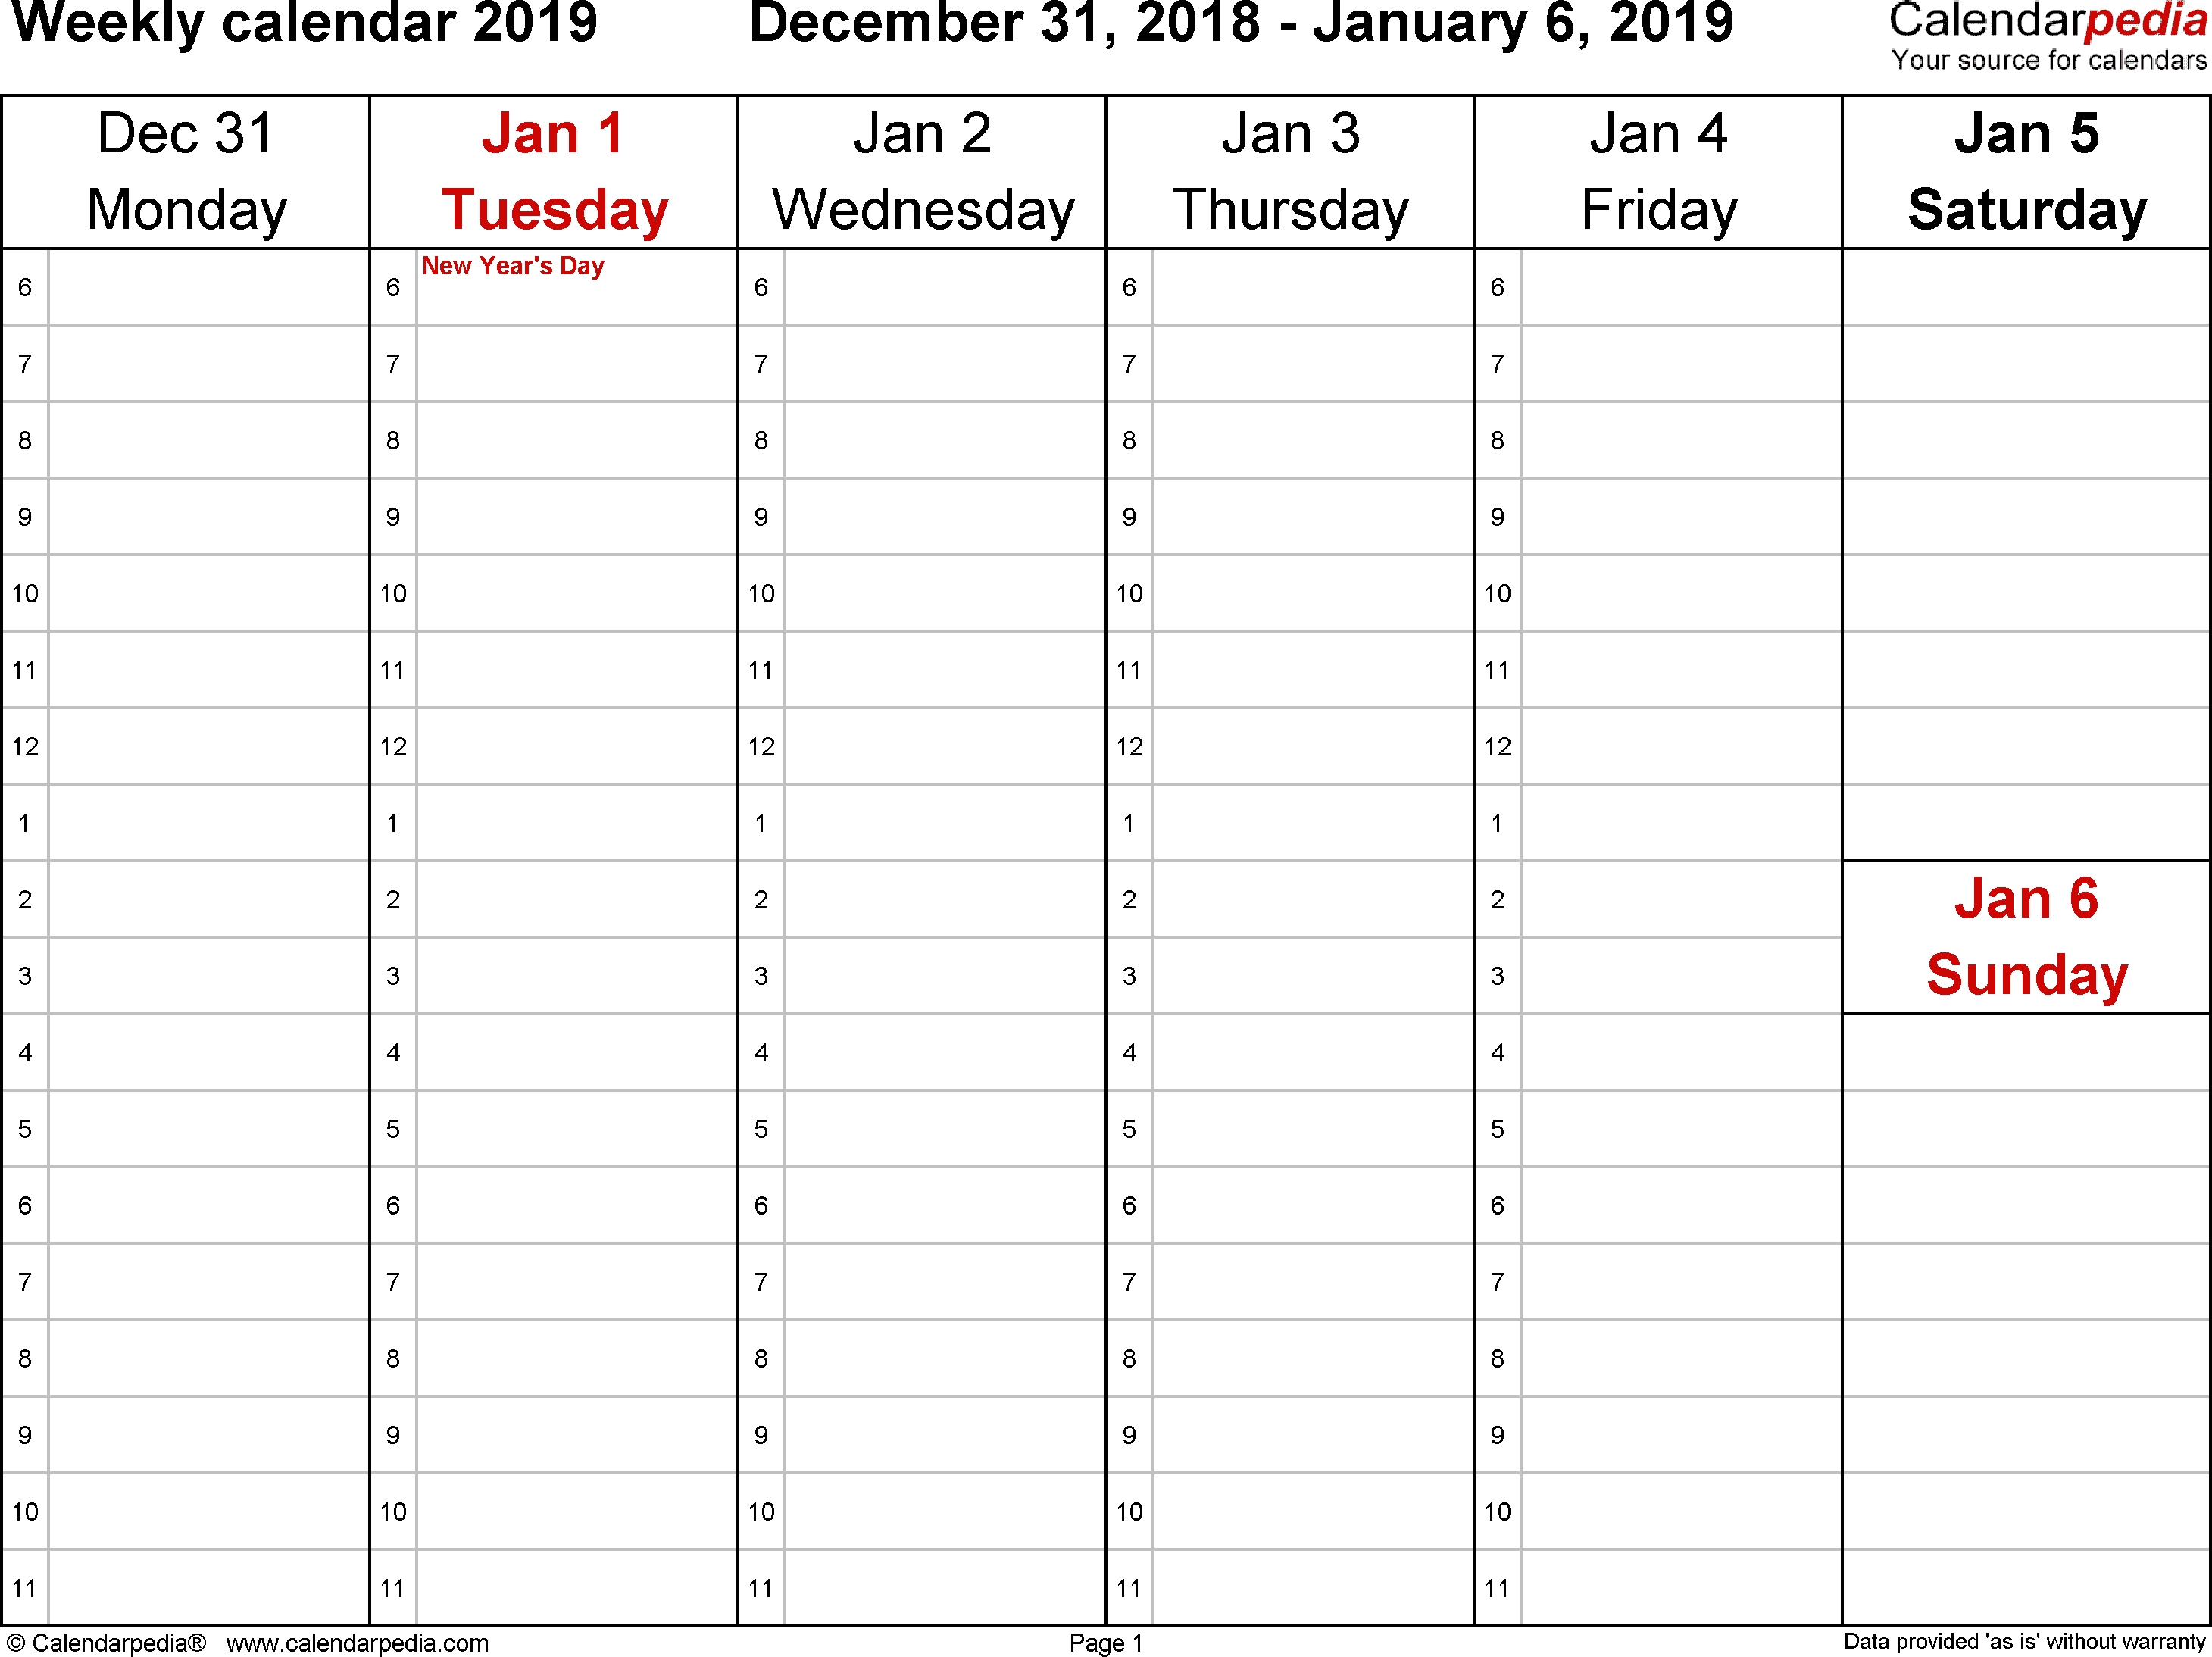 Weekly Calendar 2019 For Word - 12 Free Printable Templates-Printable Monday-Friday Calendar 2020 Monthly